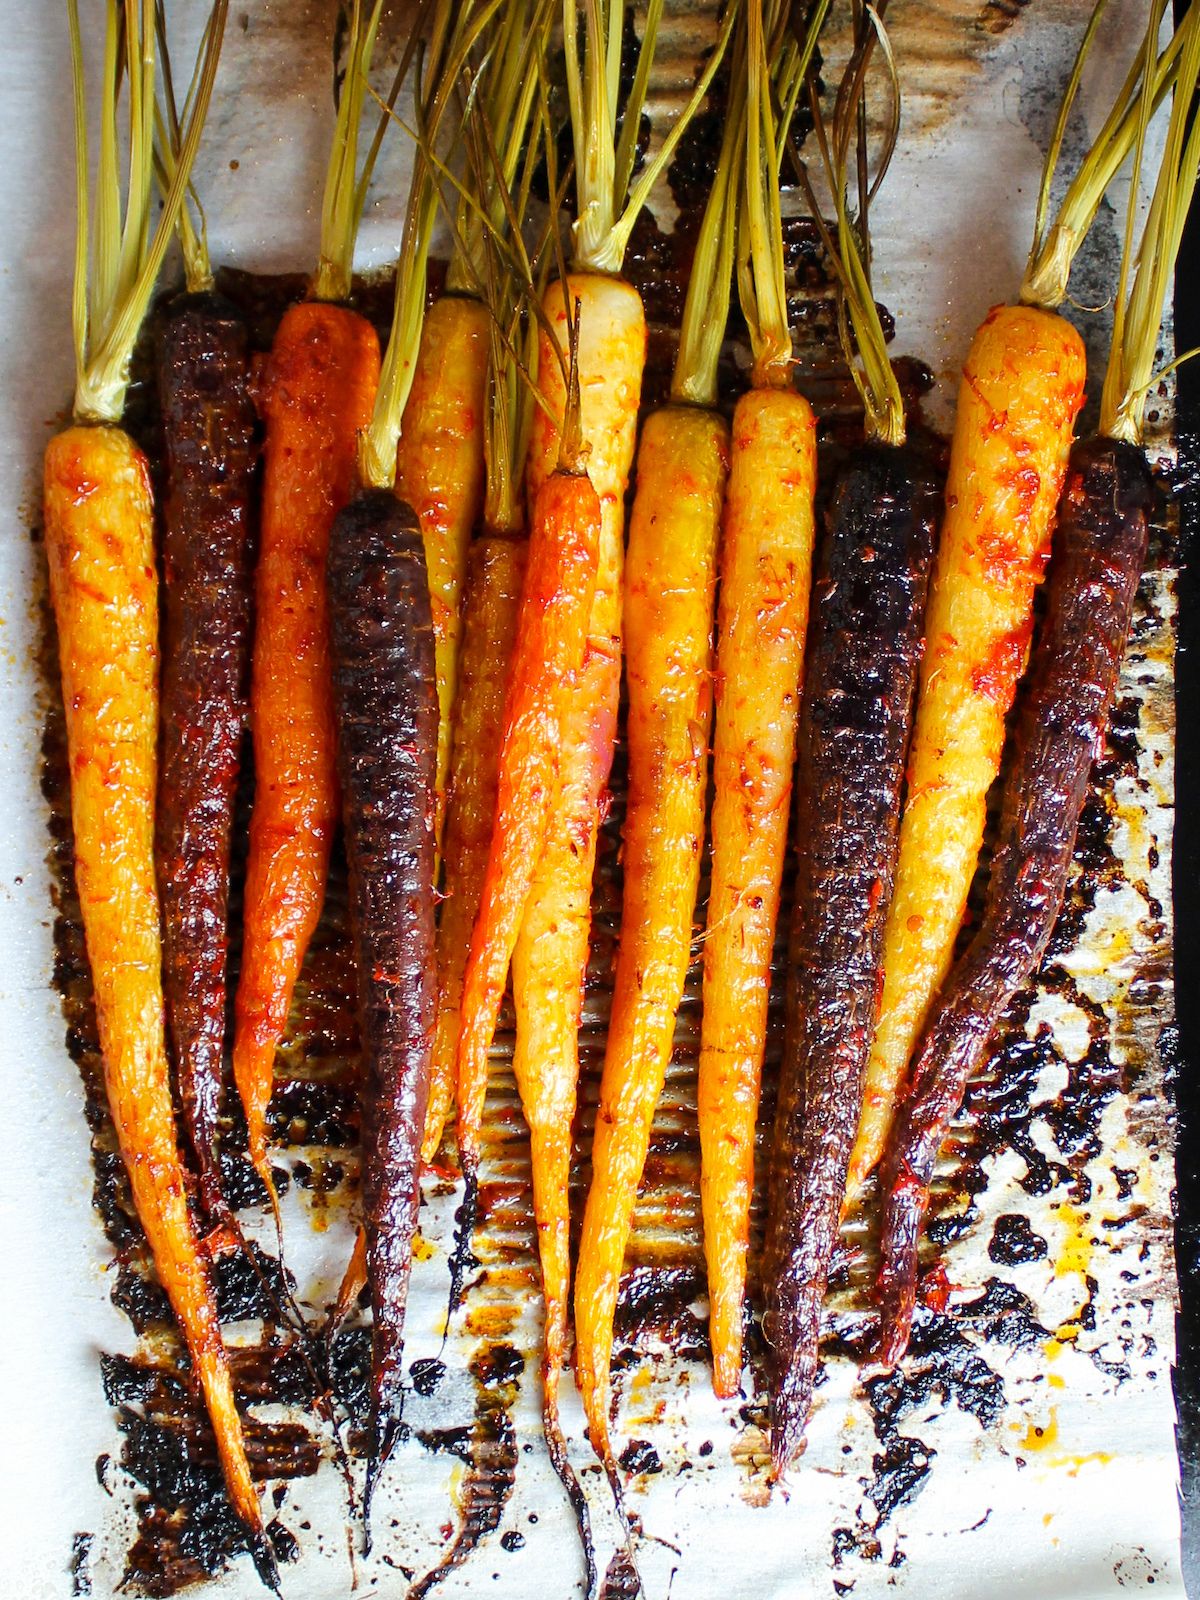 Carrots tossed in harissa sauce and roasted on a baking sheet.